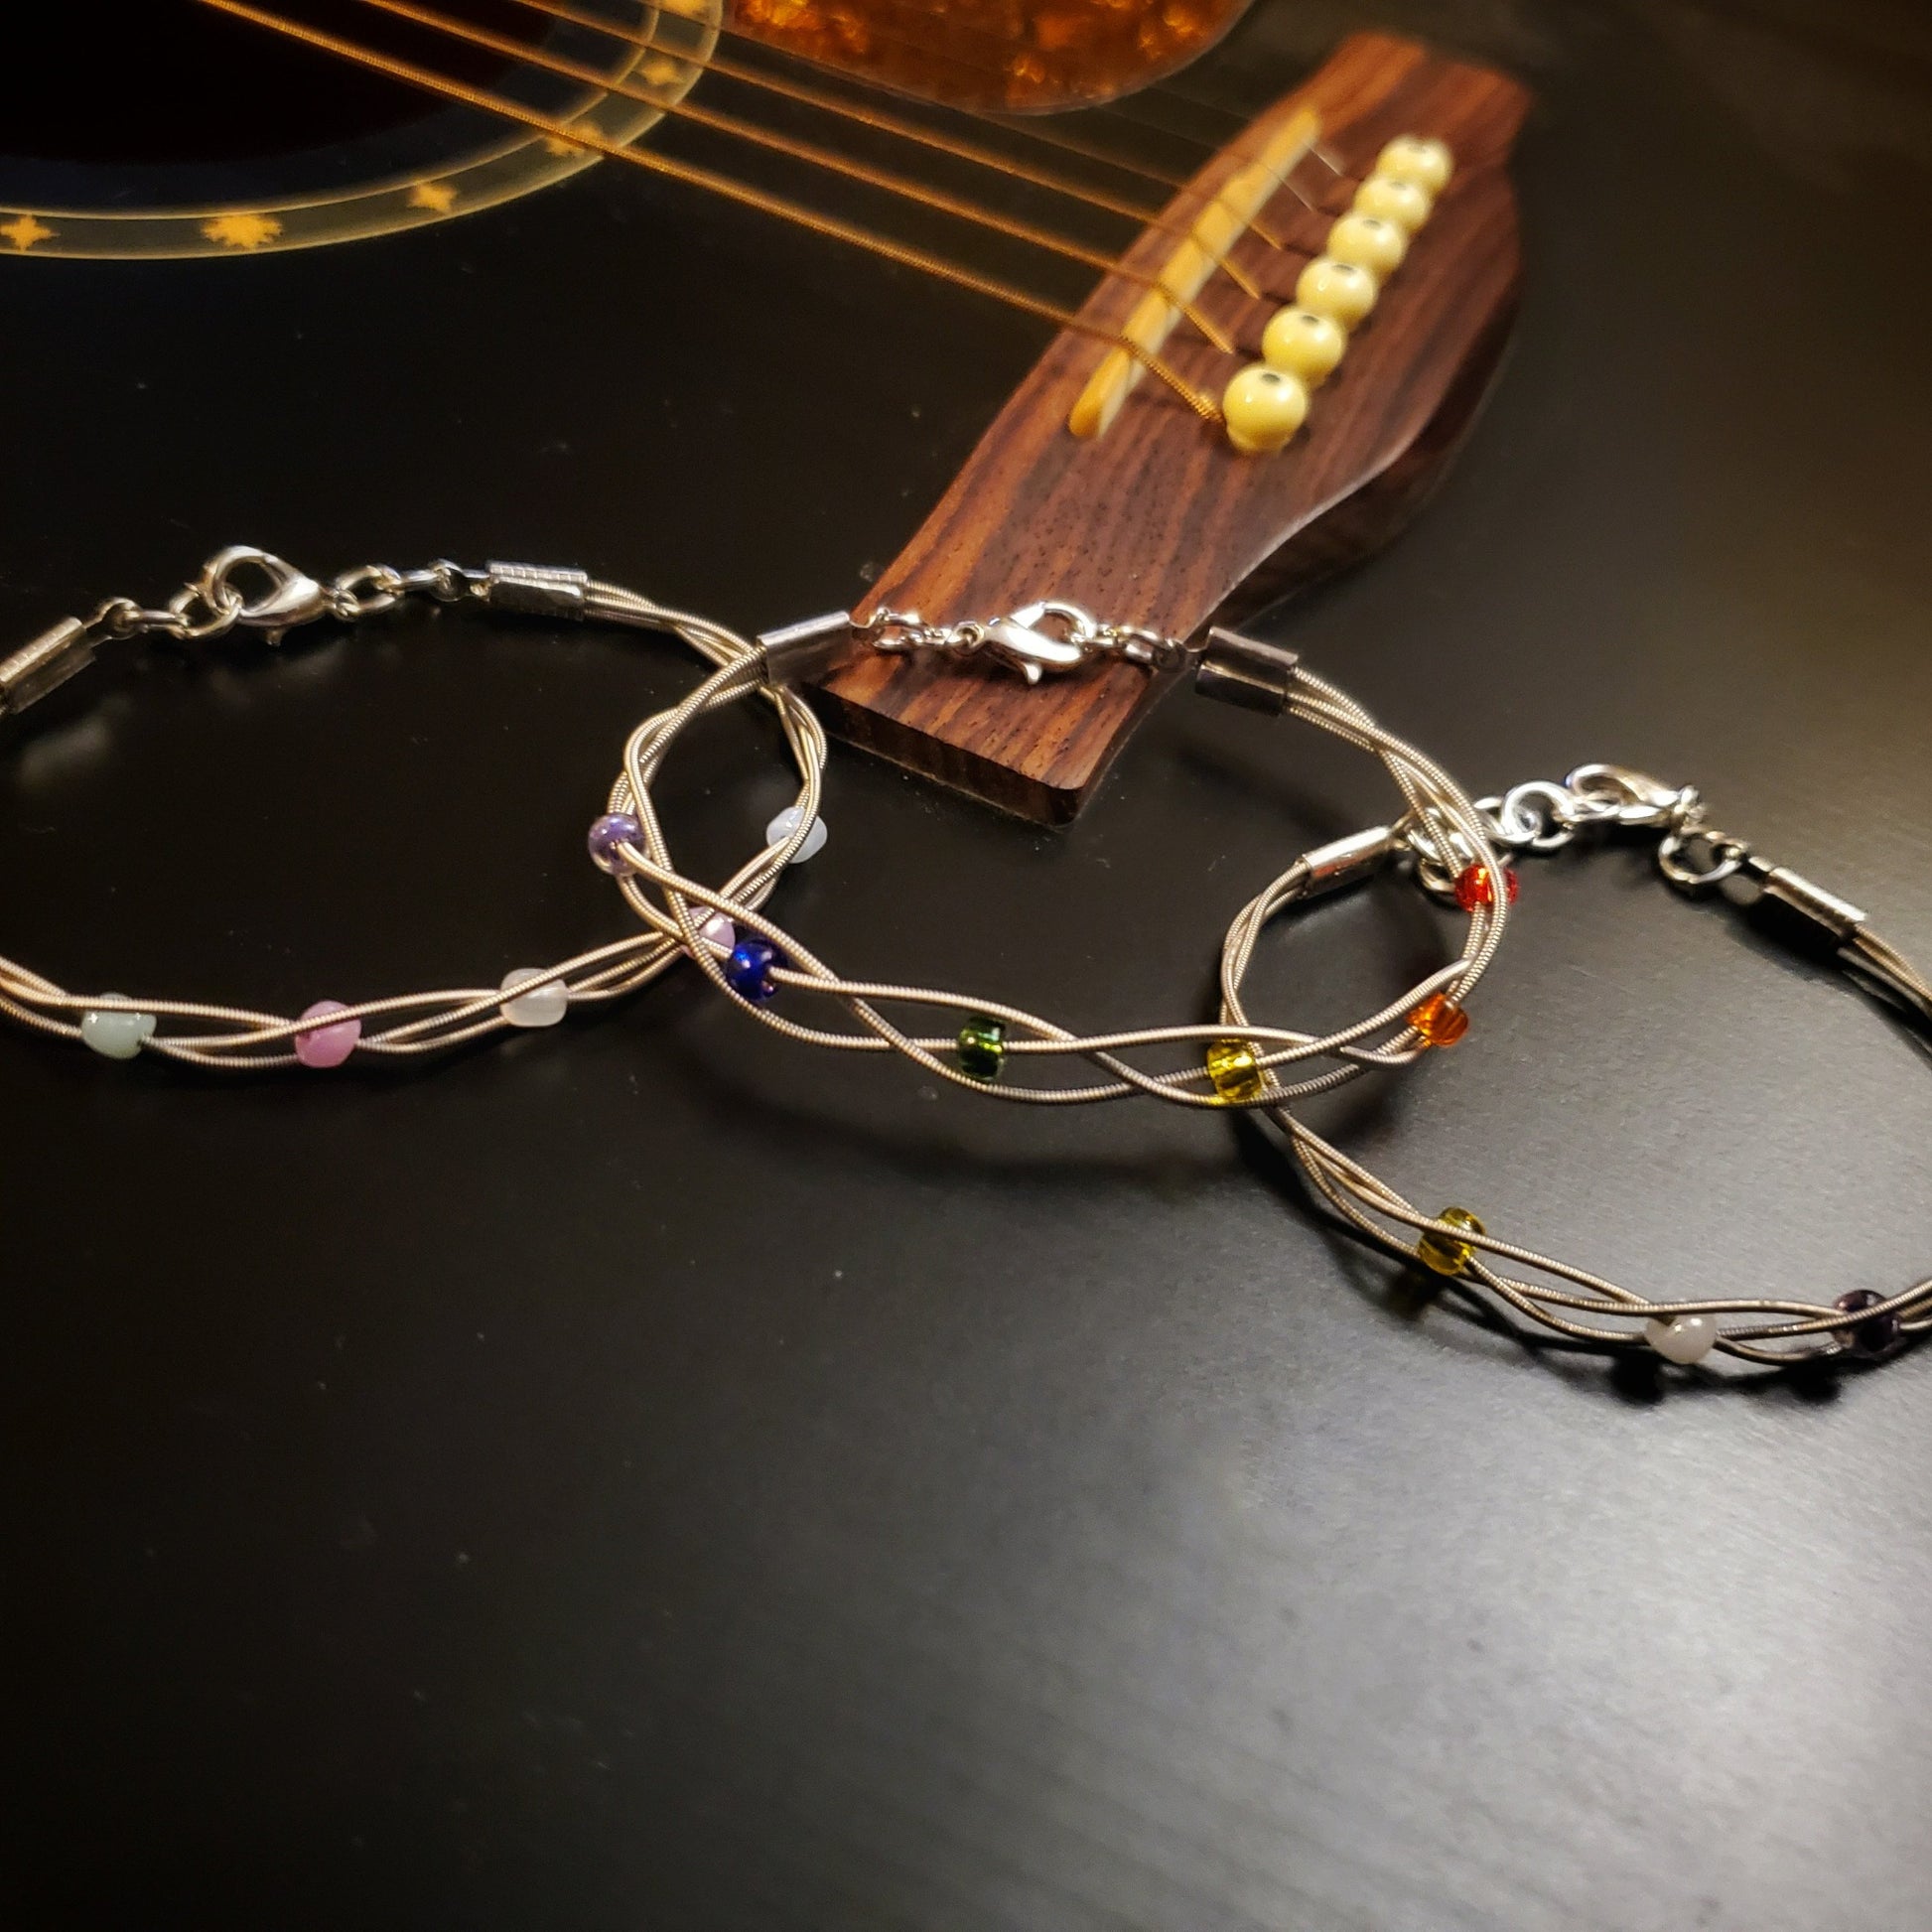 three clasp style bracelet made from braided upcycled guitar strings with glass beads representing the LGBTQ/Trans/Non-Binary Pride flags